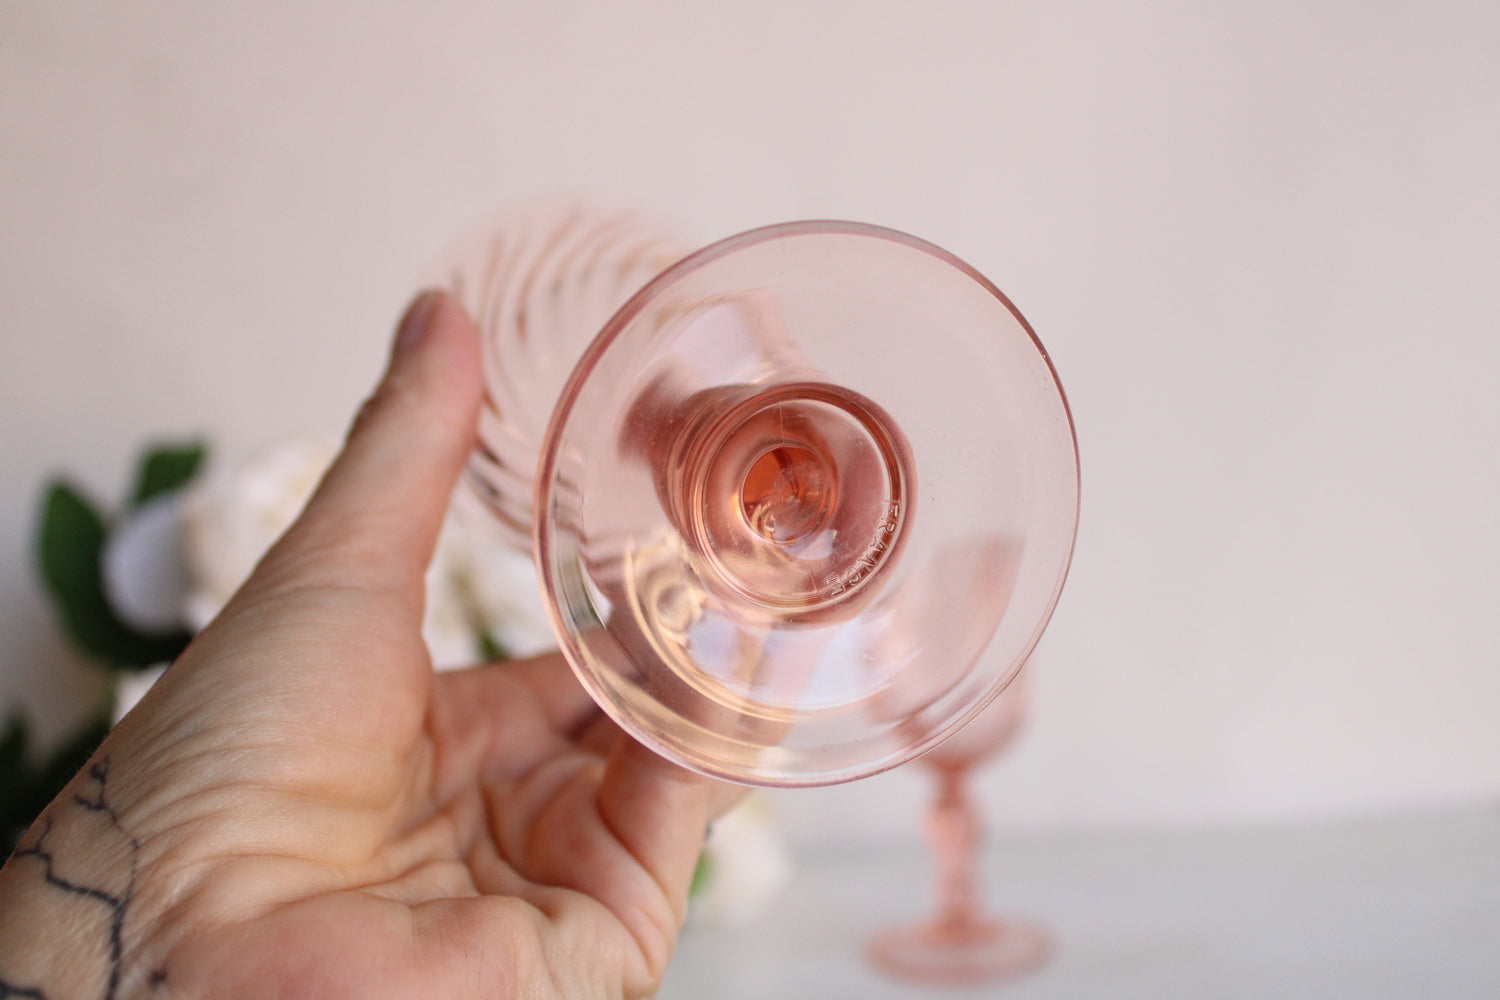 Vintage Pair of French Pink Sherry Glasses